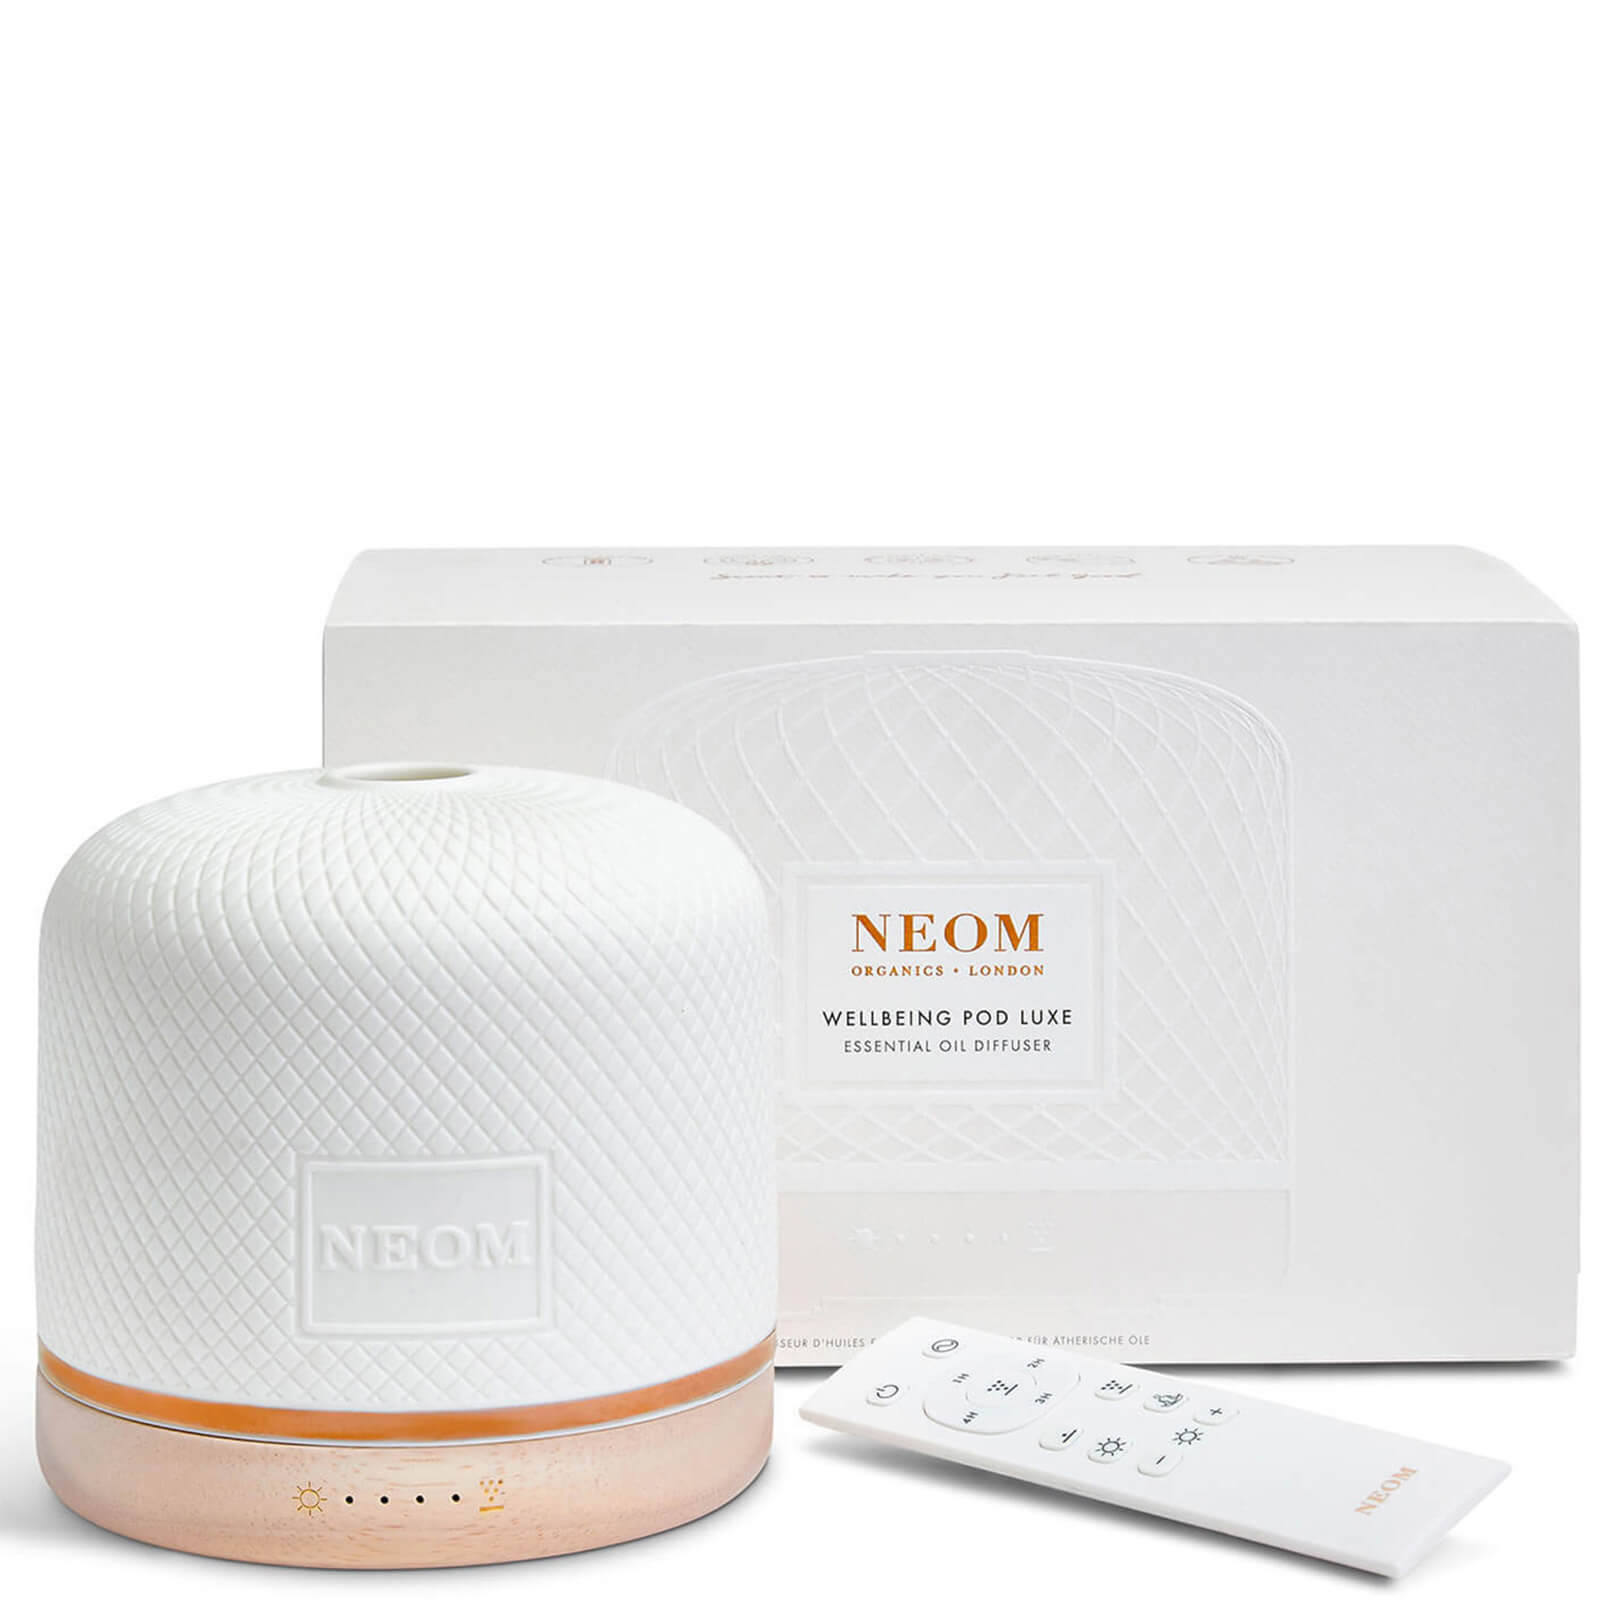 NEOM diffusore Wellbeing Pod Luxe